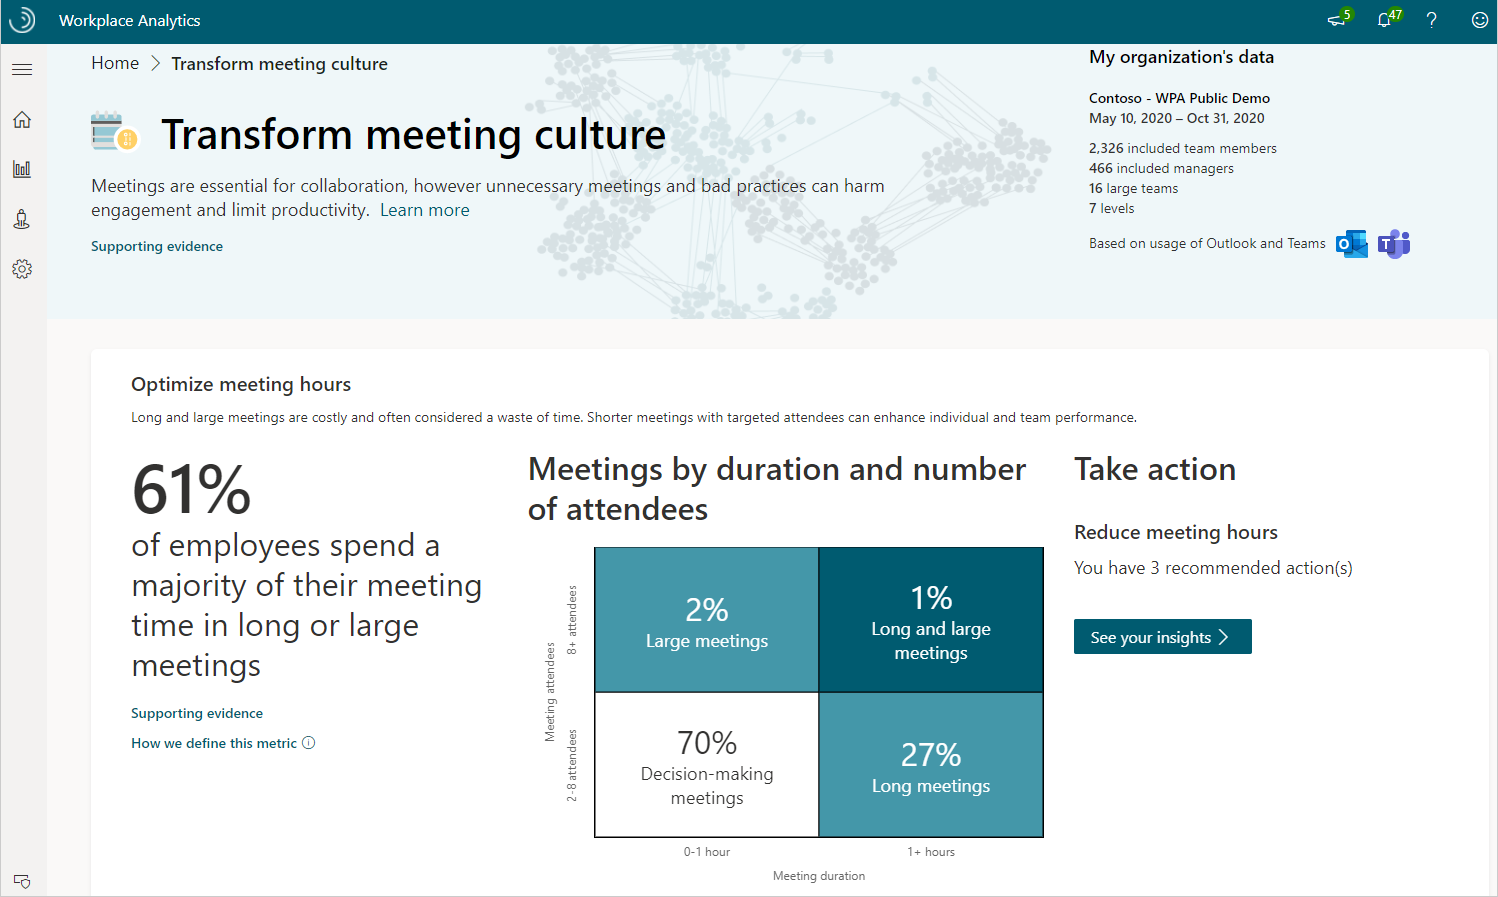 Transform meeting culture page.